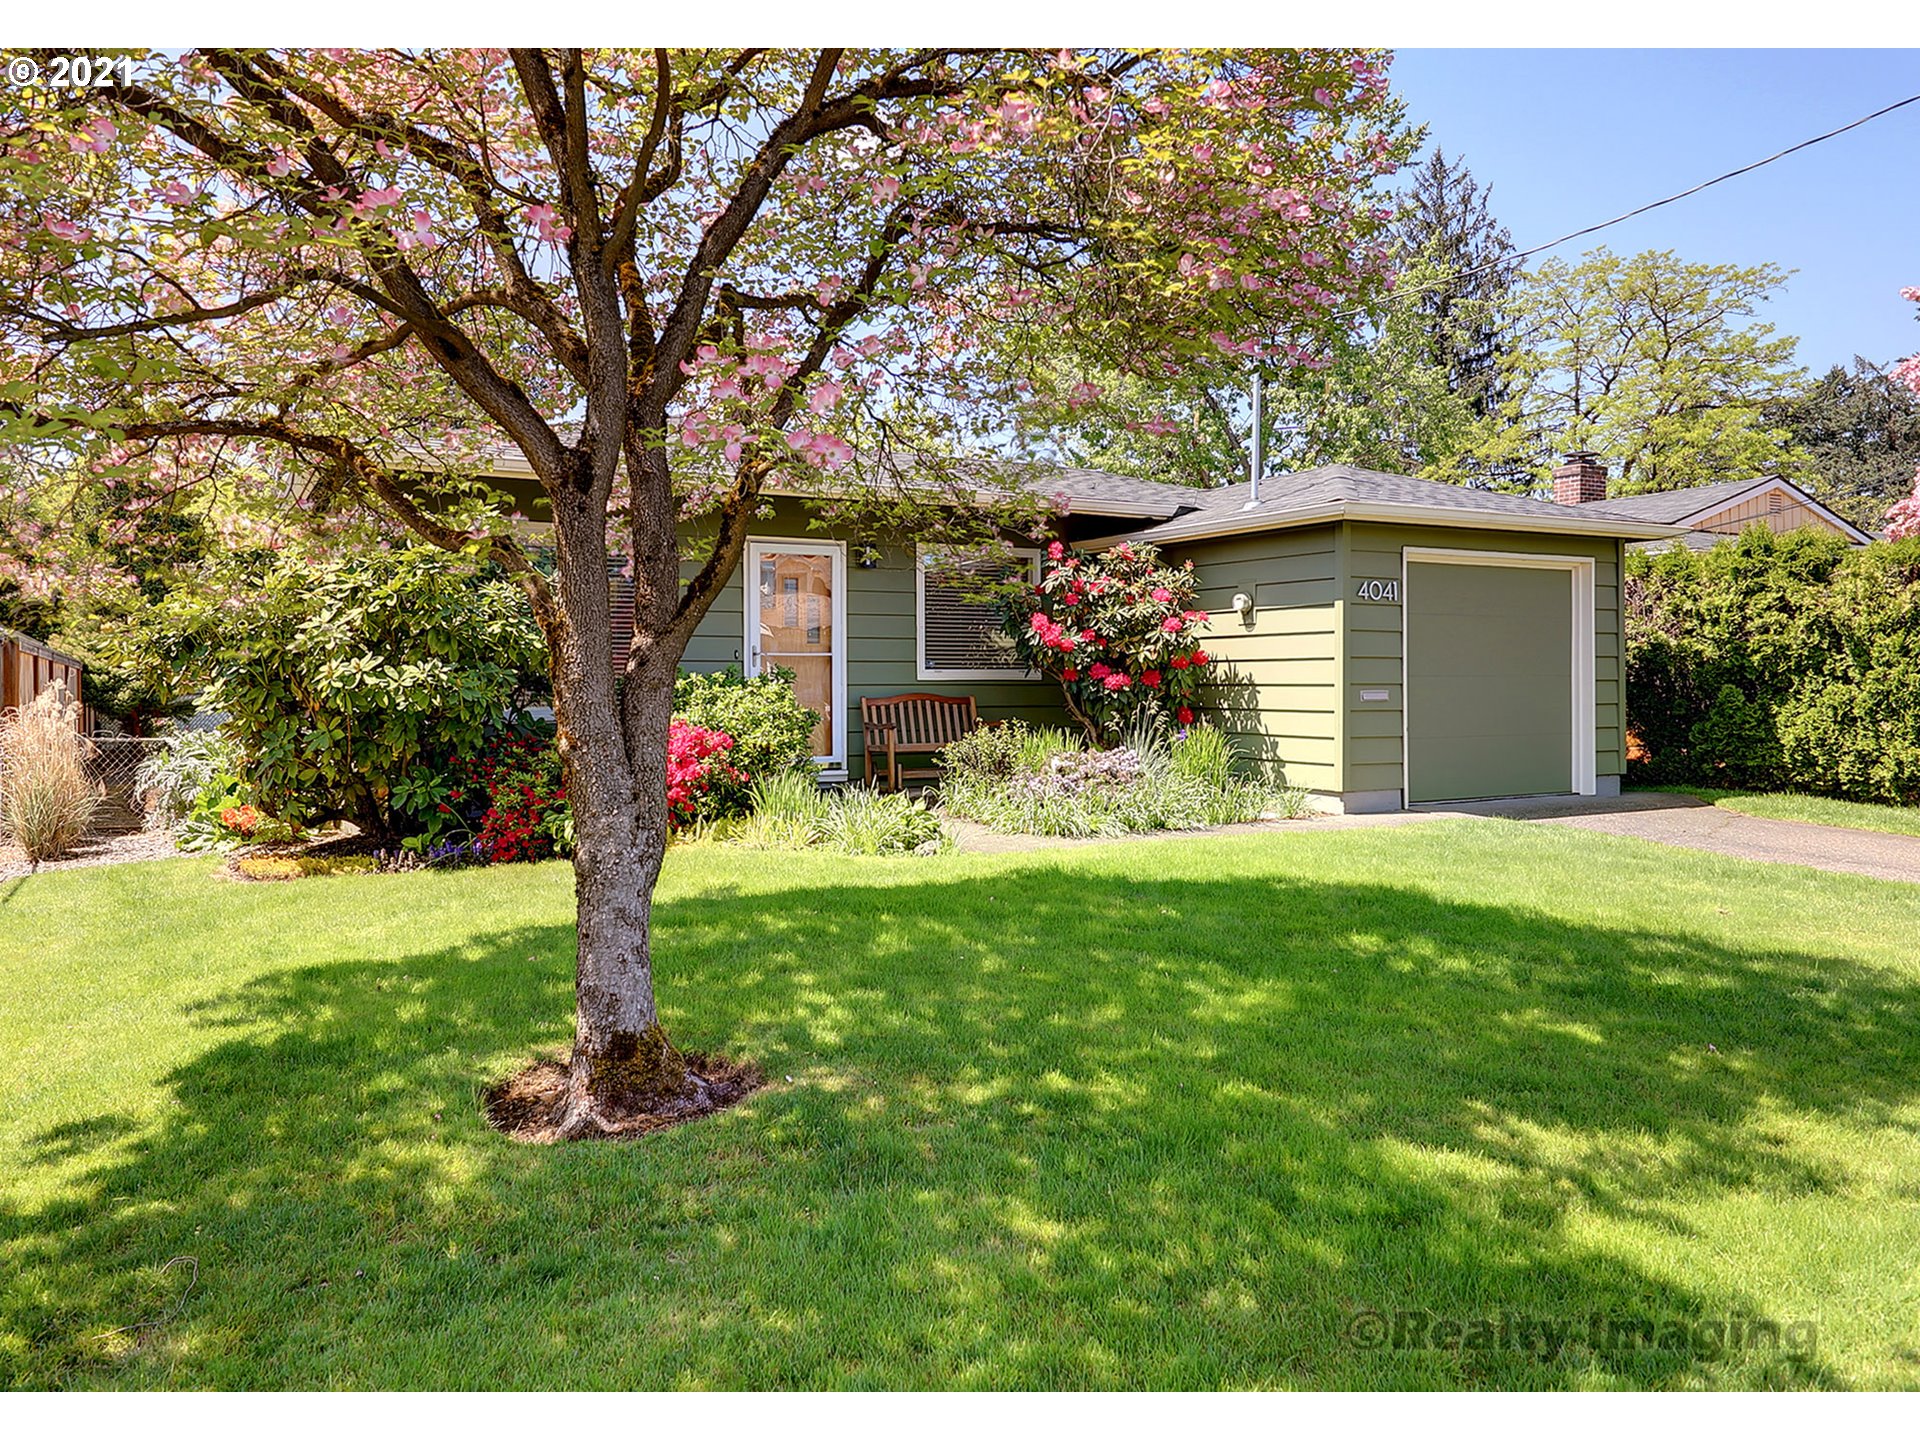 4041 SE 74TH AVE (1 of 28)